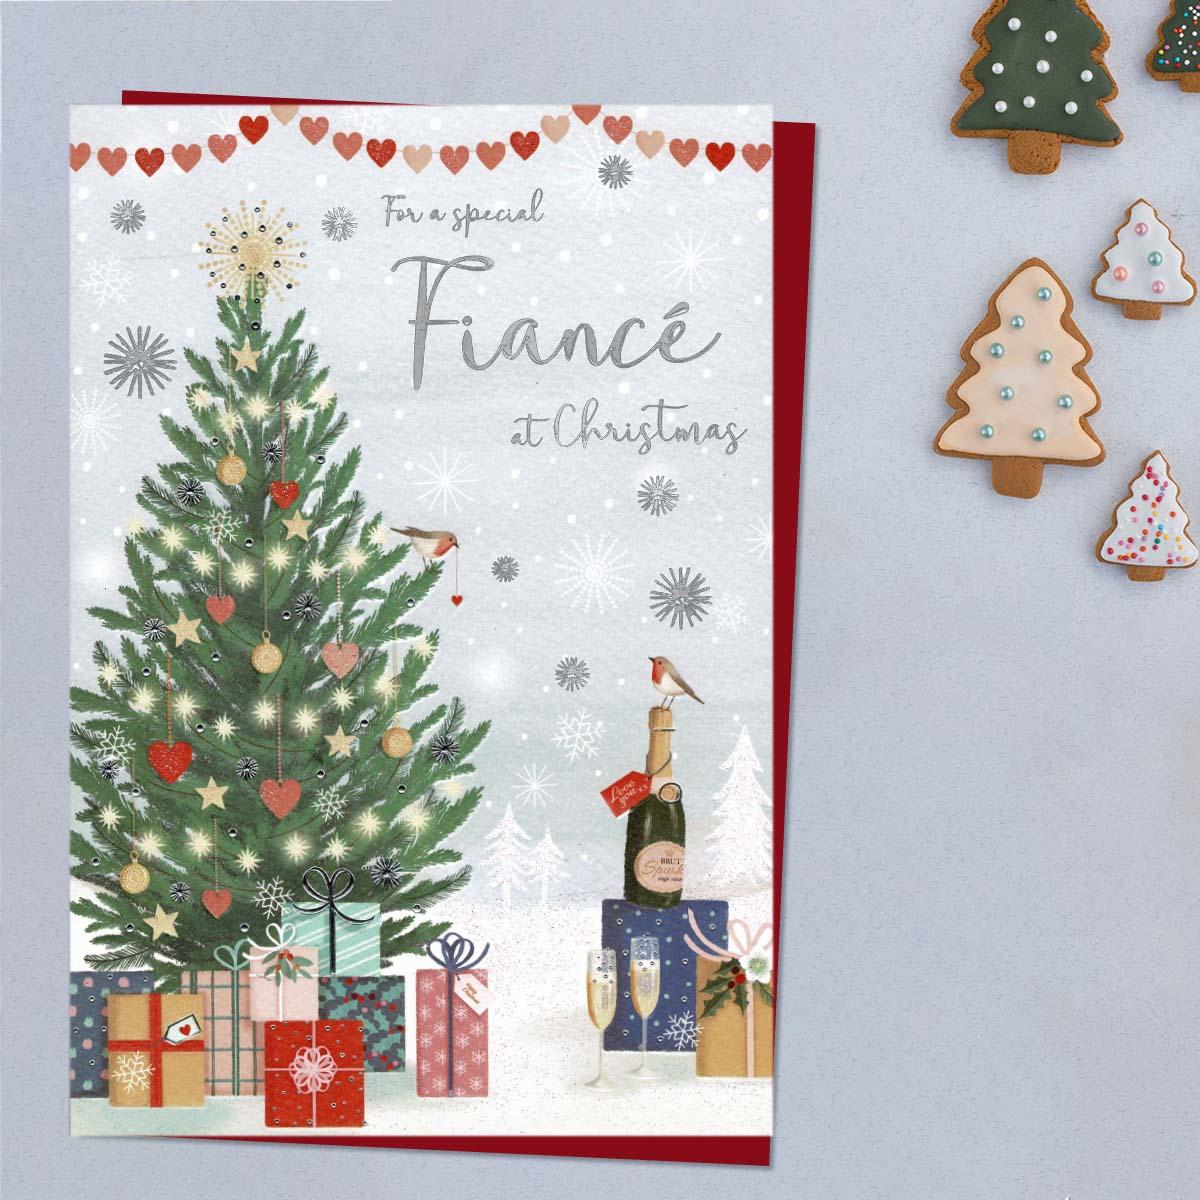 Fiance Christmas Card Displayed Alongside Its Red Envelope